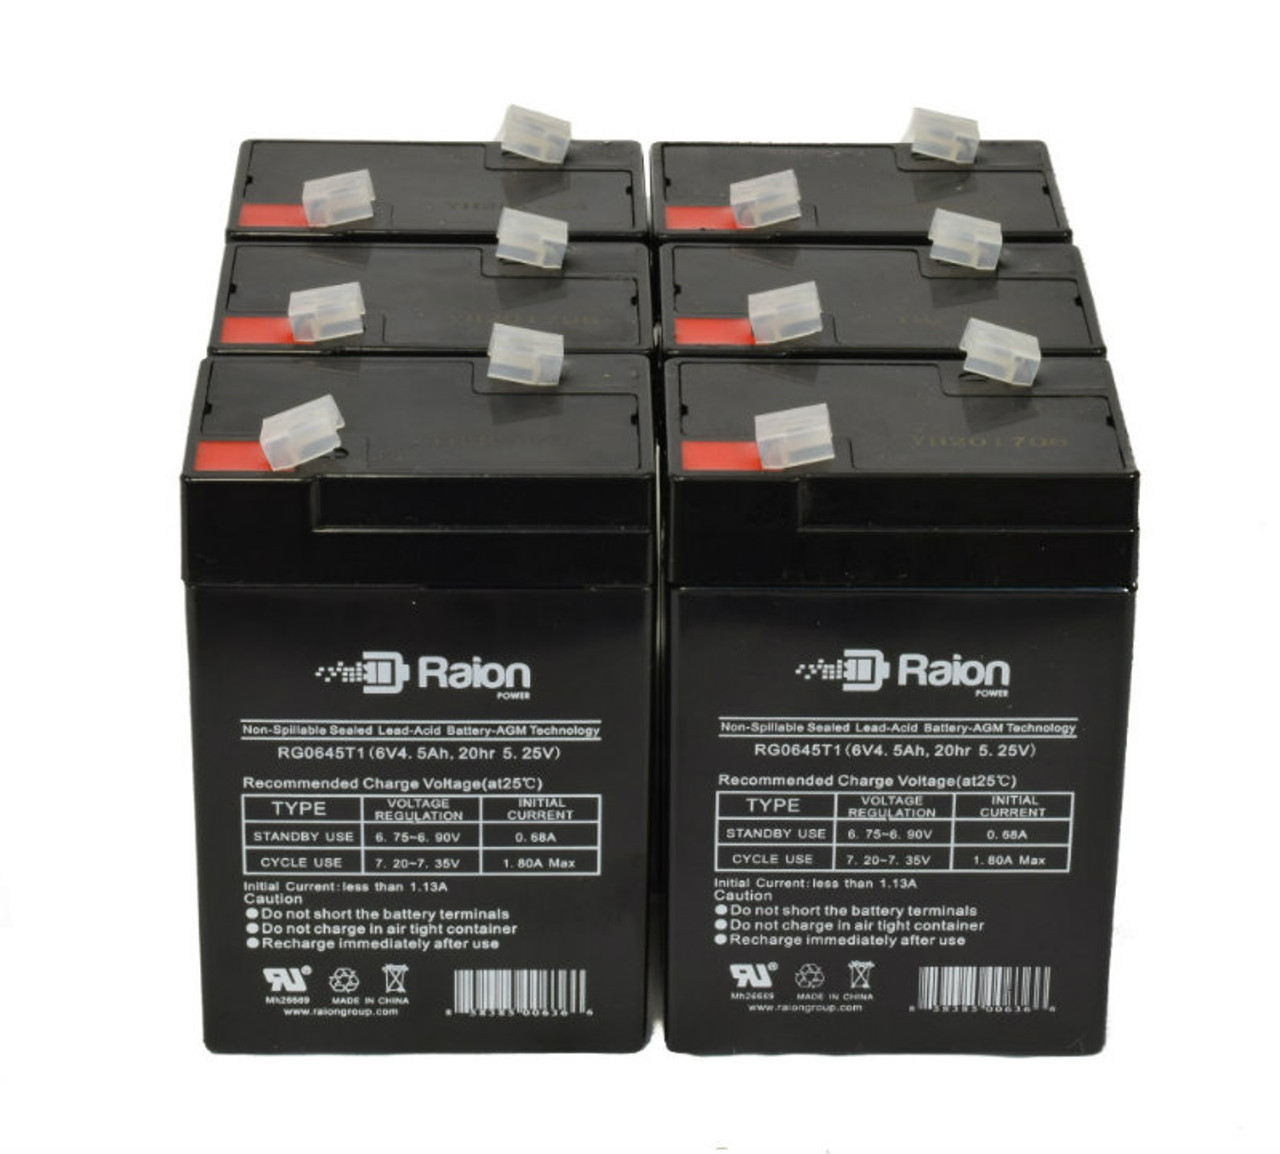 Raion Power 6 Volt 4.5Ah RG0645T1 Replacement Battery for LCB SP5-6 - 6 Pack